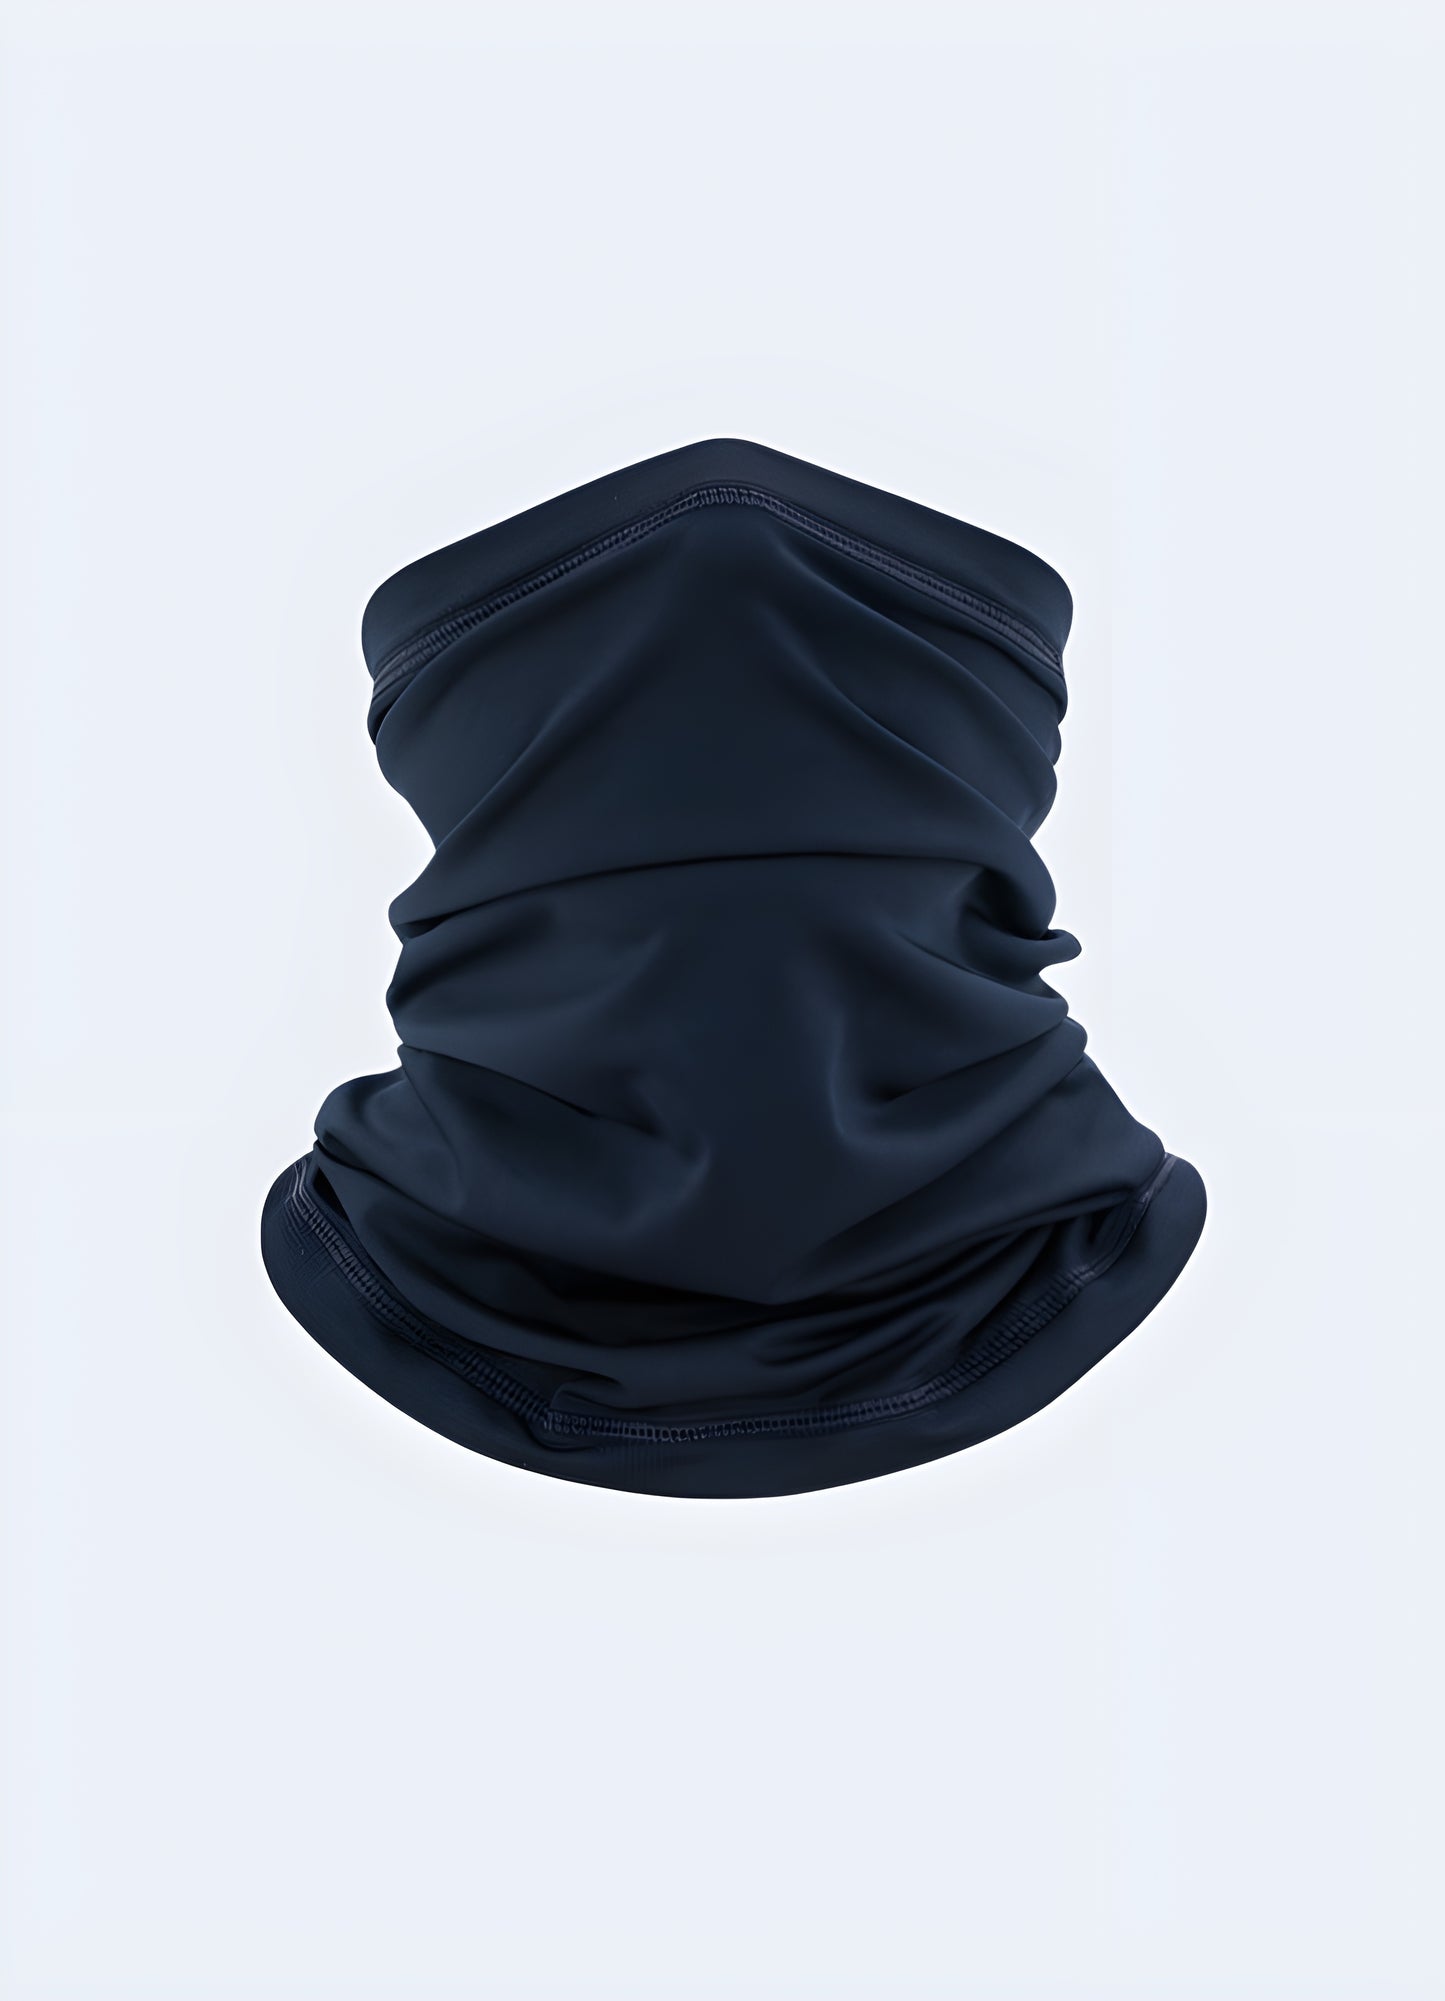  This half-face balaclava offers warmth and protection with its windproof fabric and soft fleece lining.